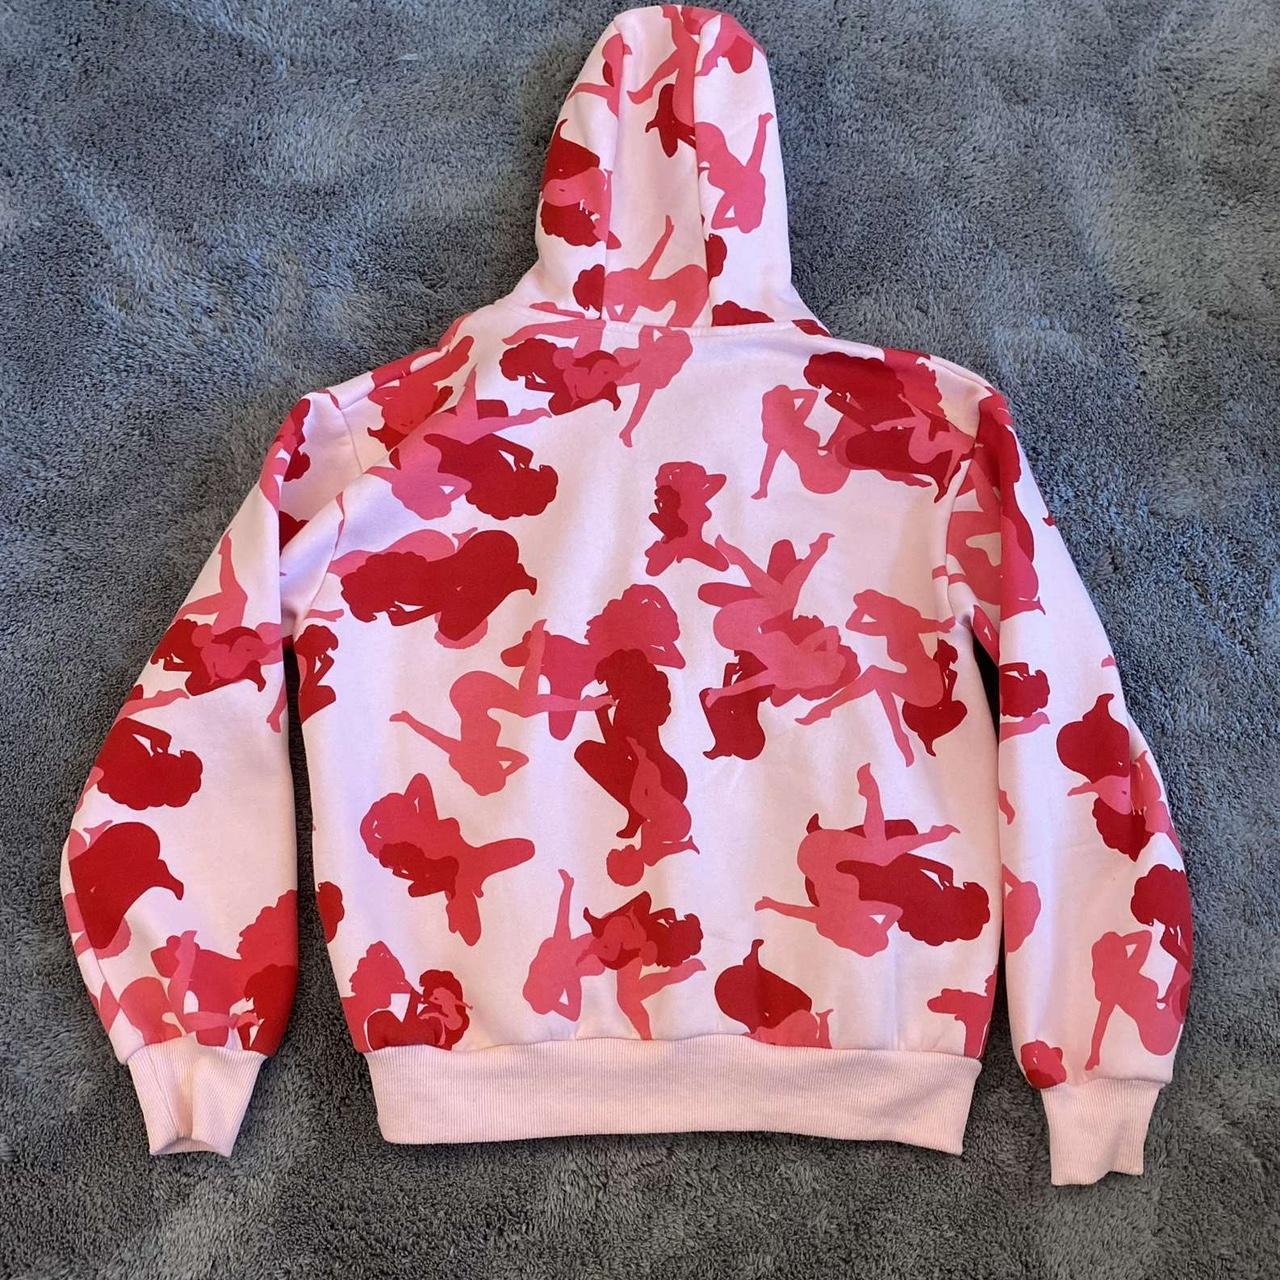 Named Collective Women's Pink and Red Hoodie | Depop